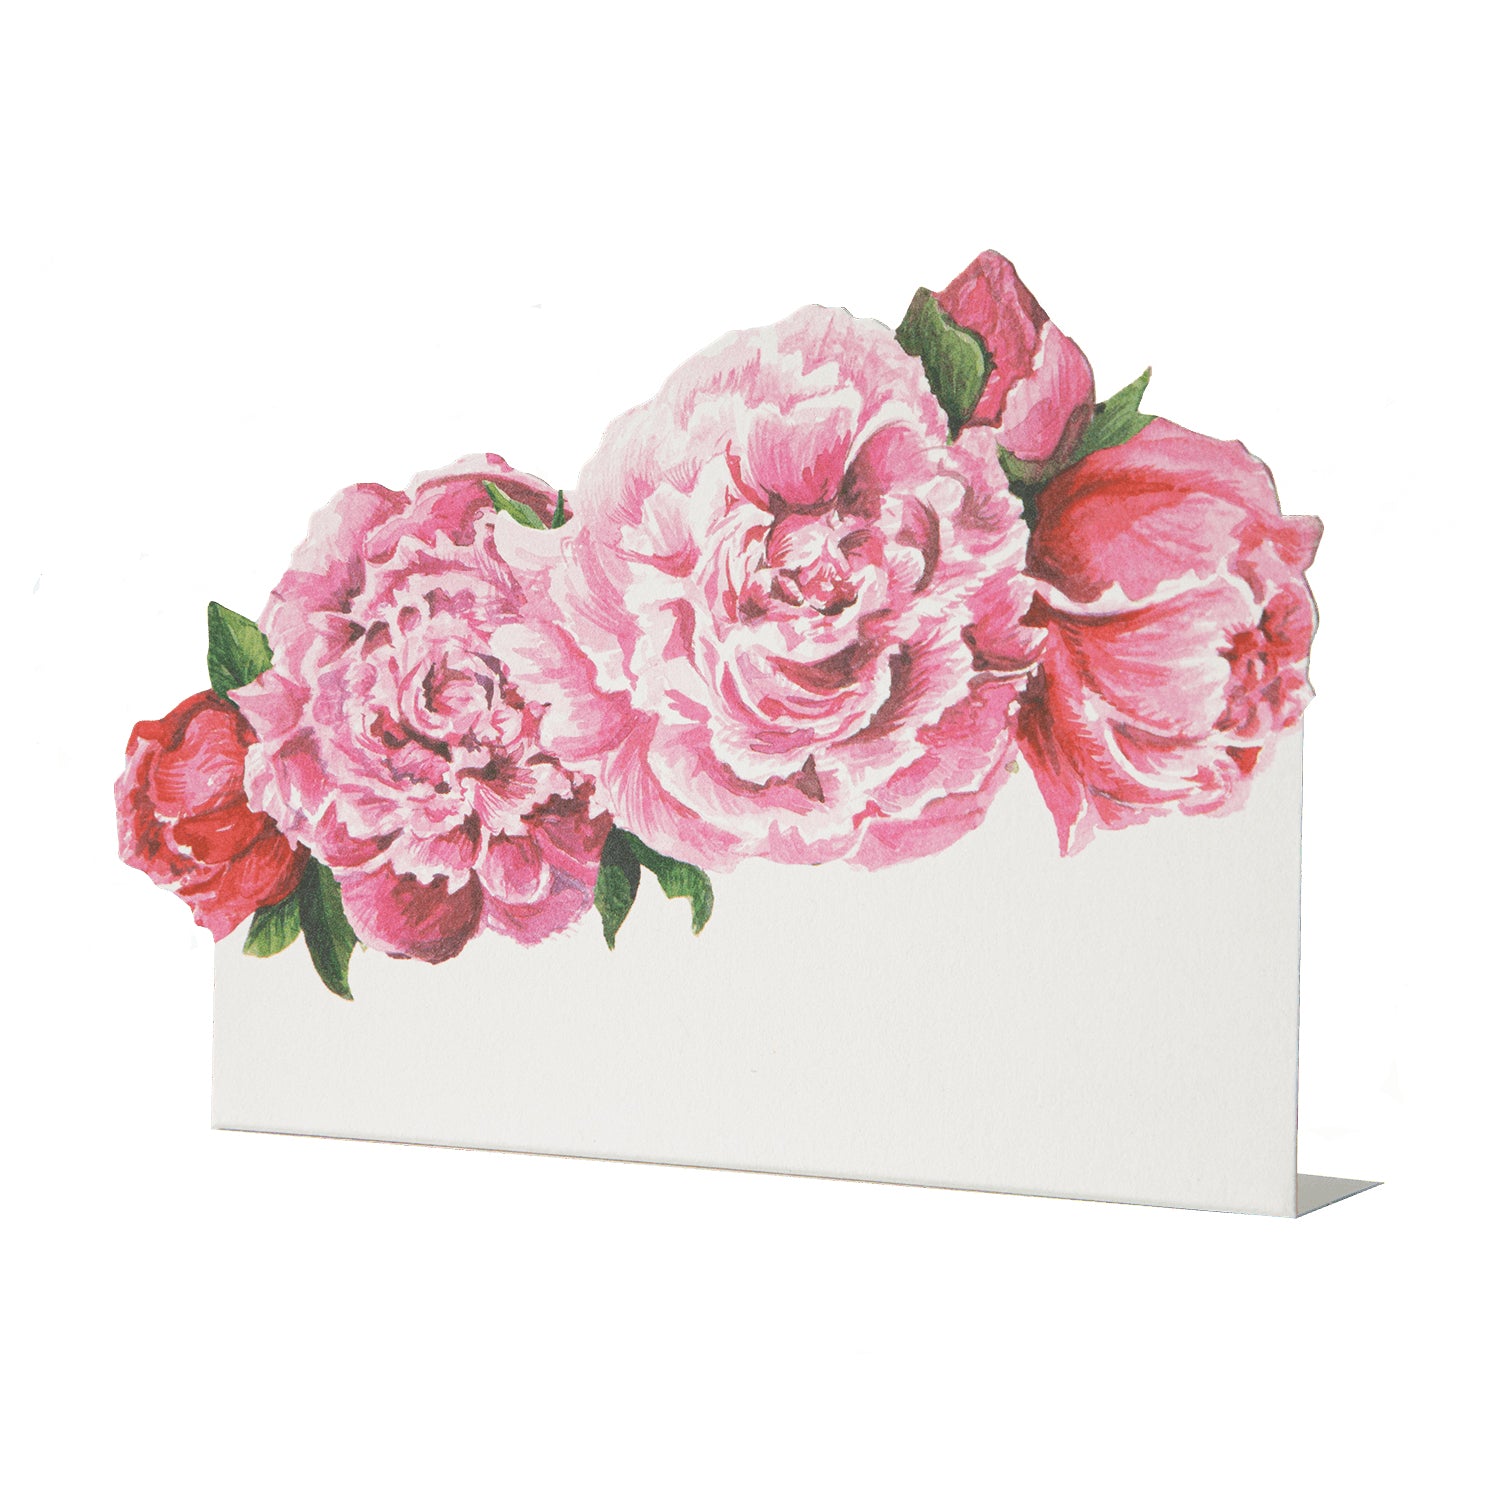 A white, die-cut freestanding place card featuring artwork of vibrant pink peonies with dainty green leaves adorning the top edge of the card.